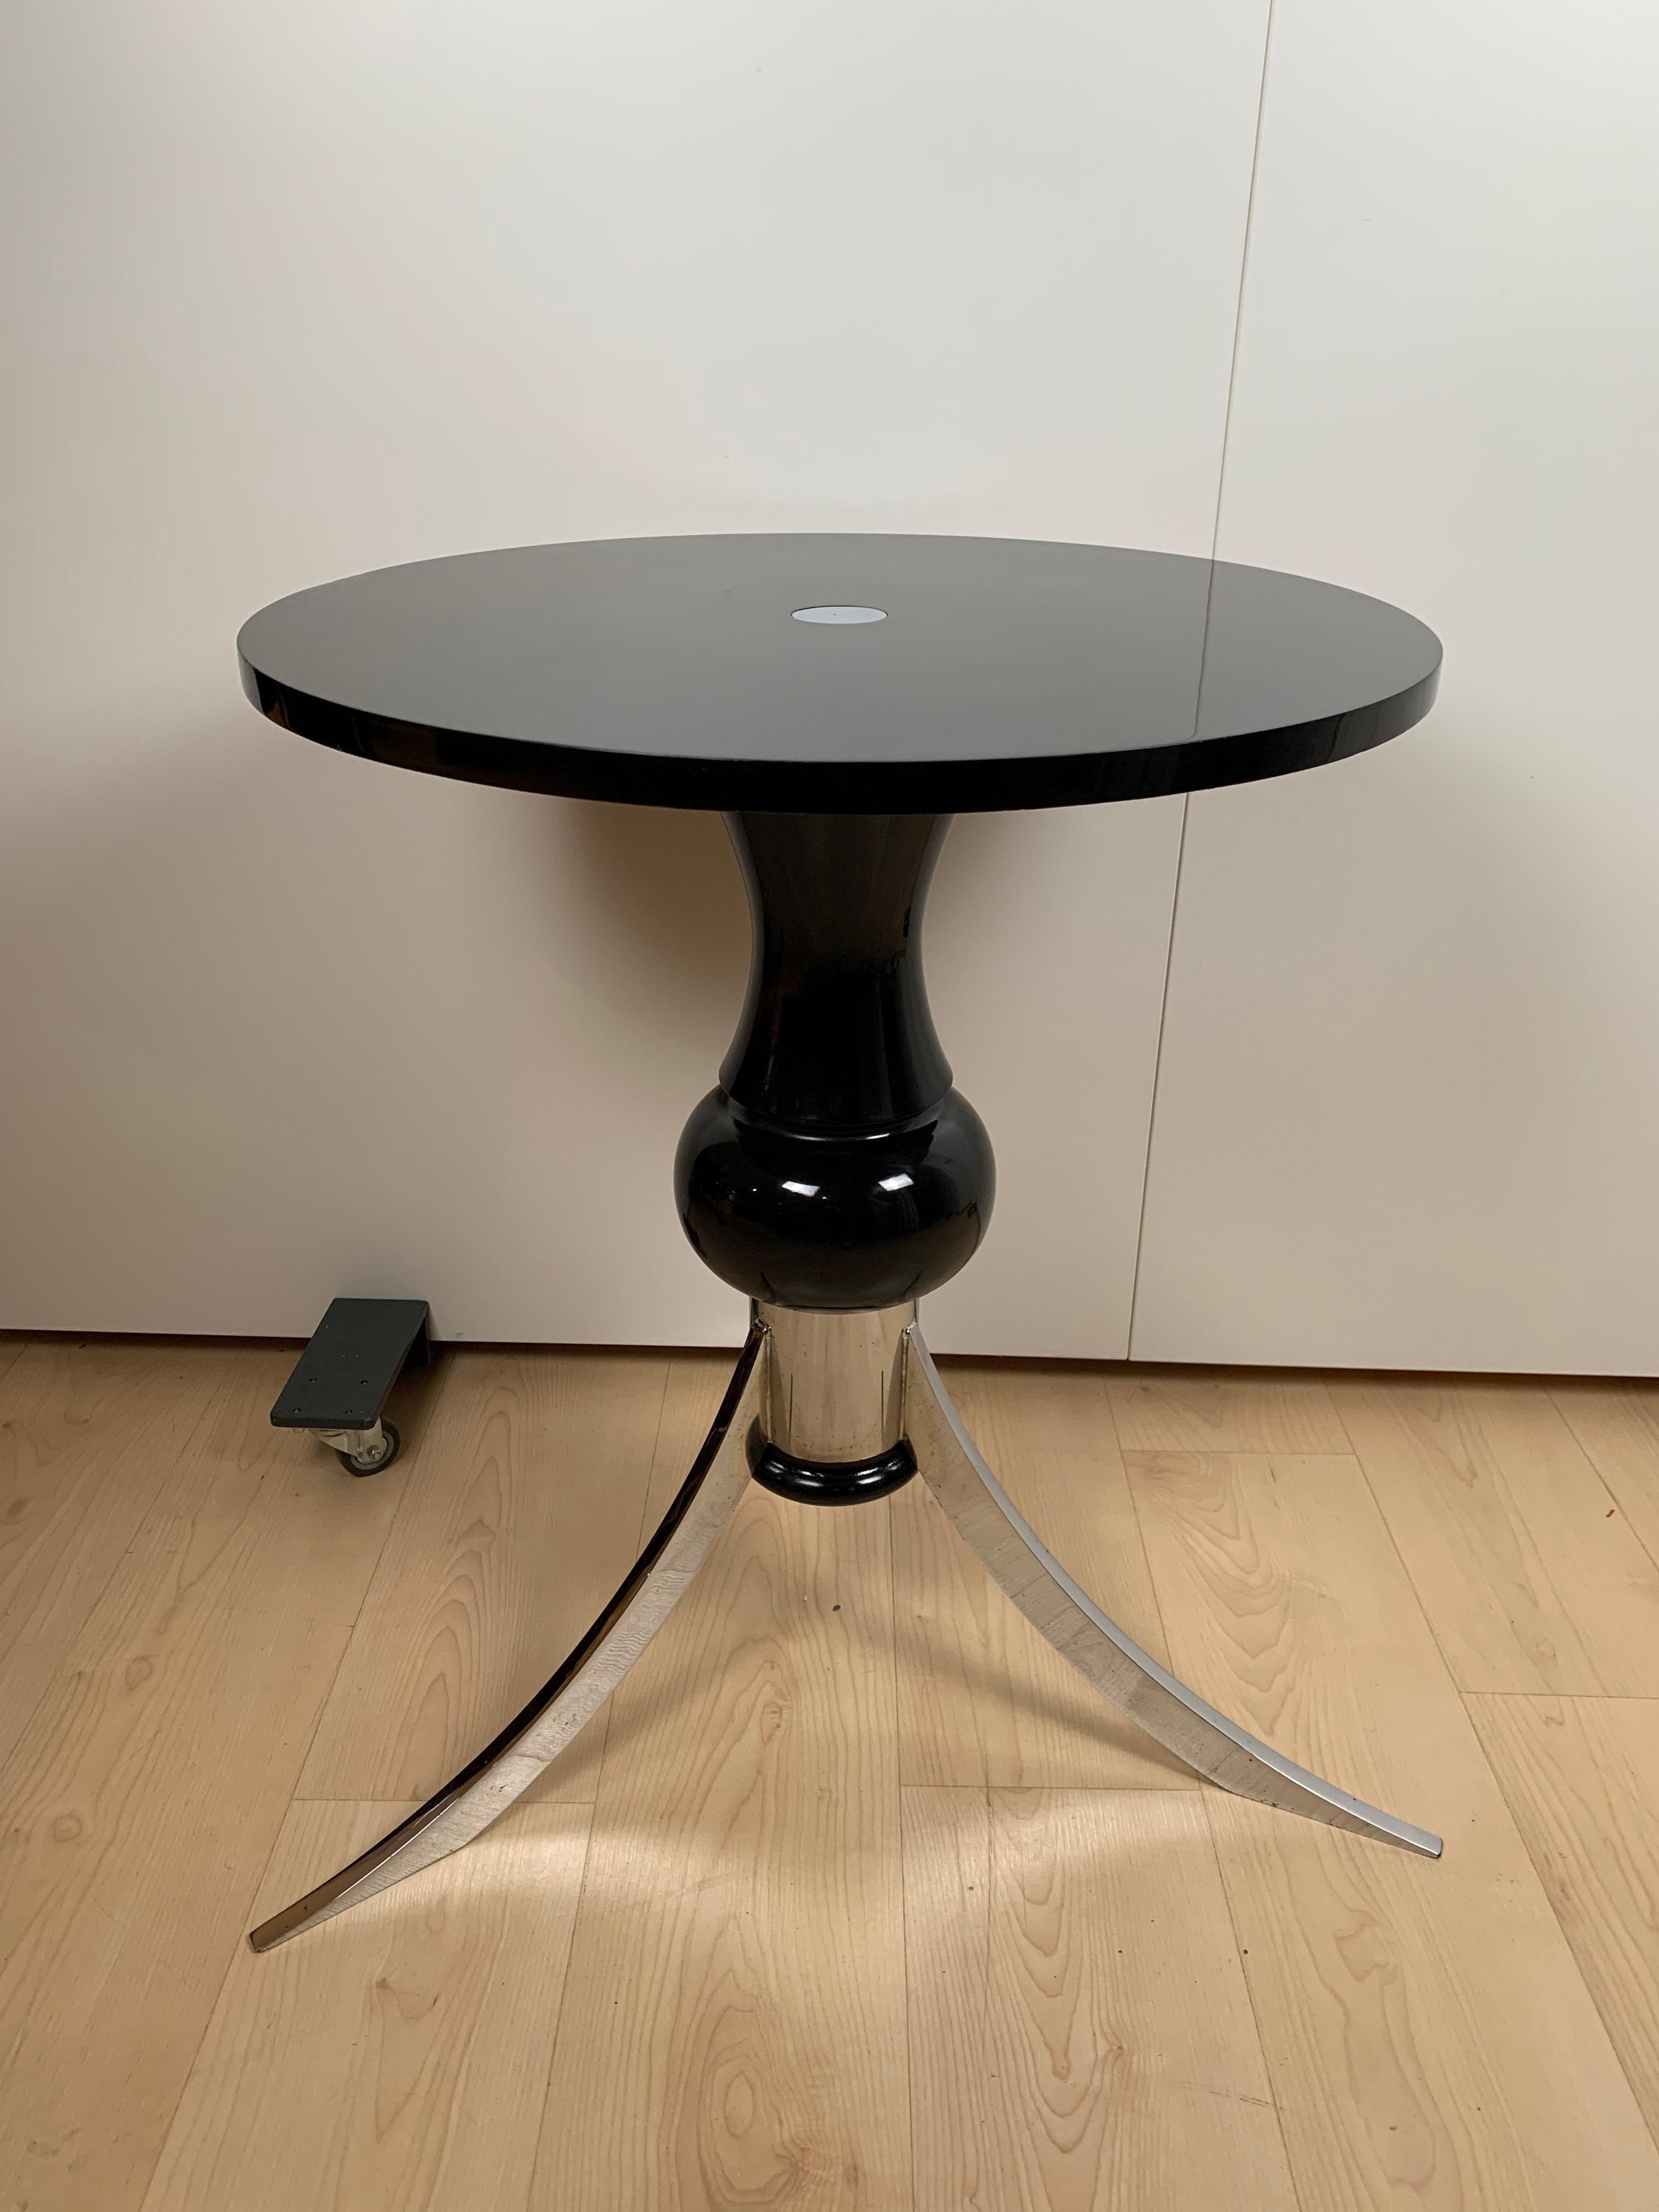 French Art Deco Side Table, Black Lacquer and Chrome, France, circa 1930